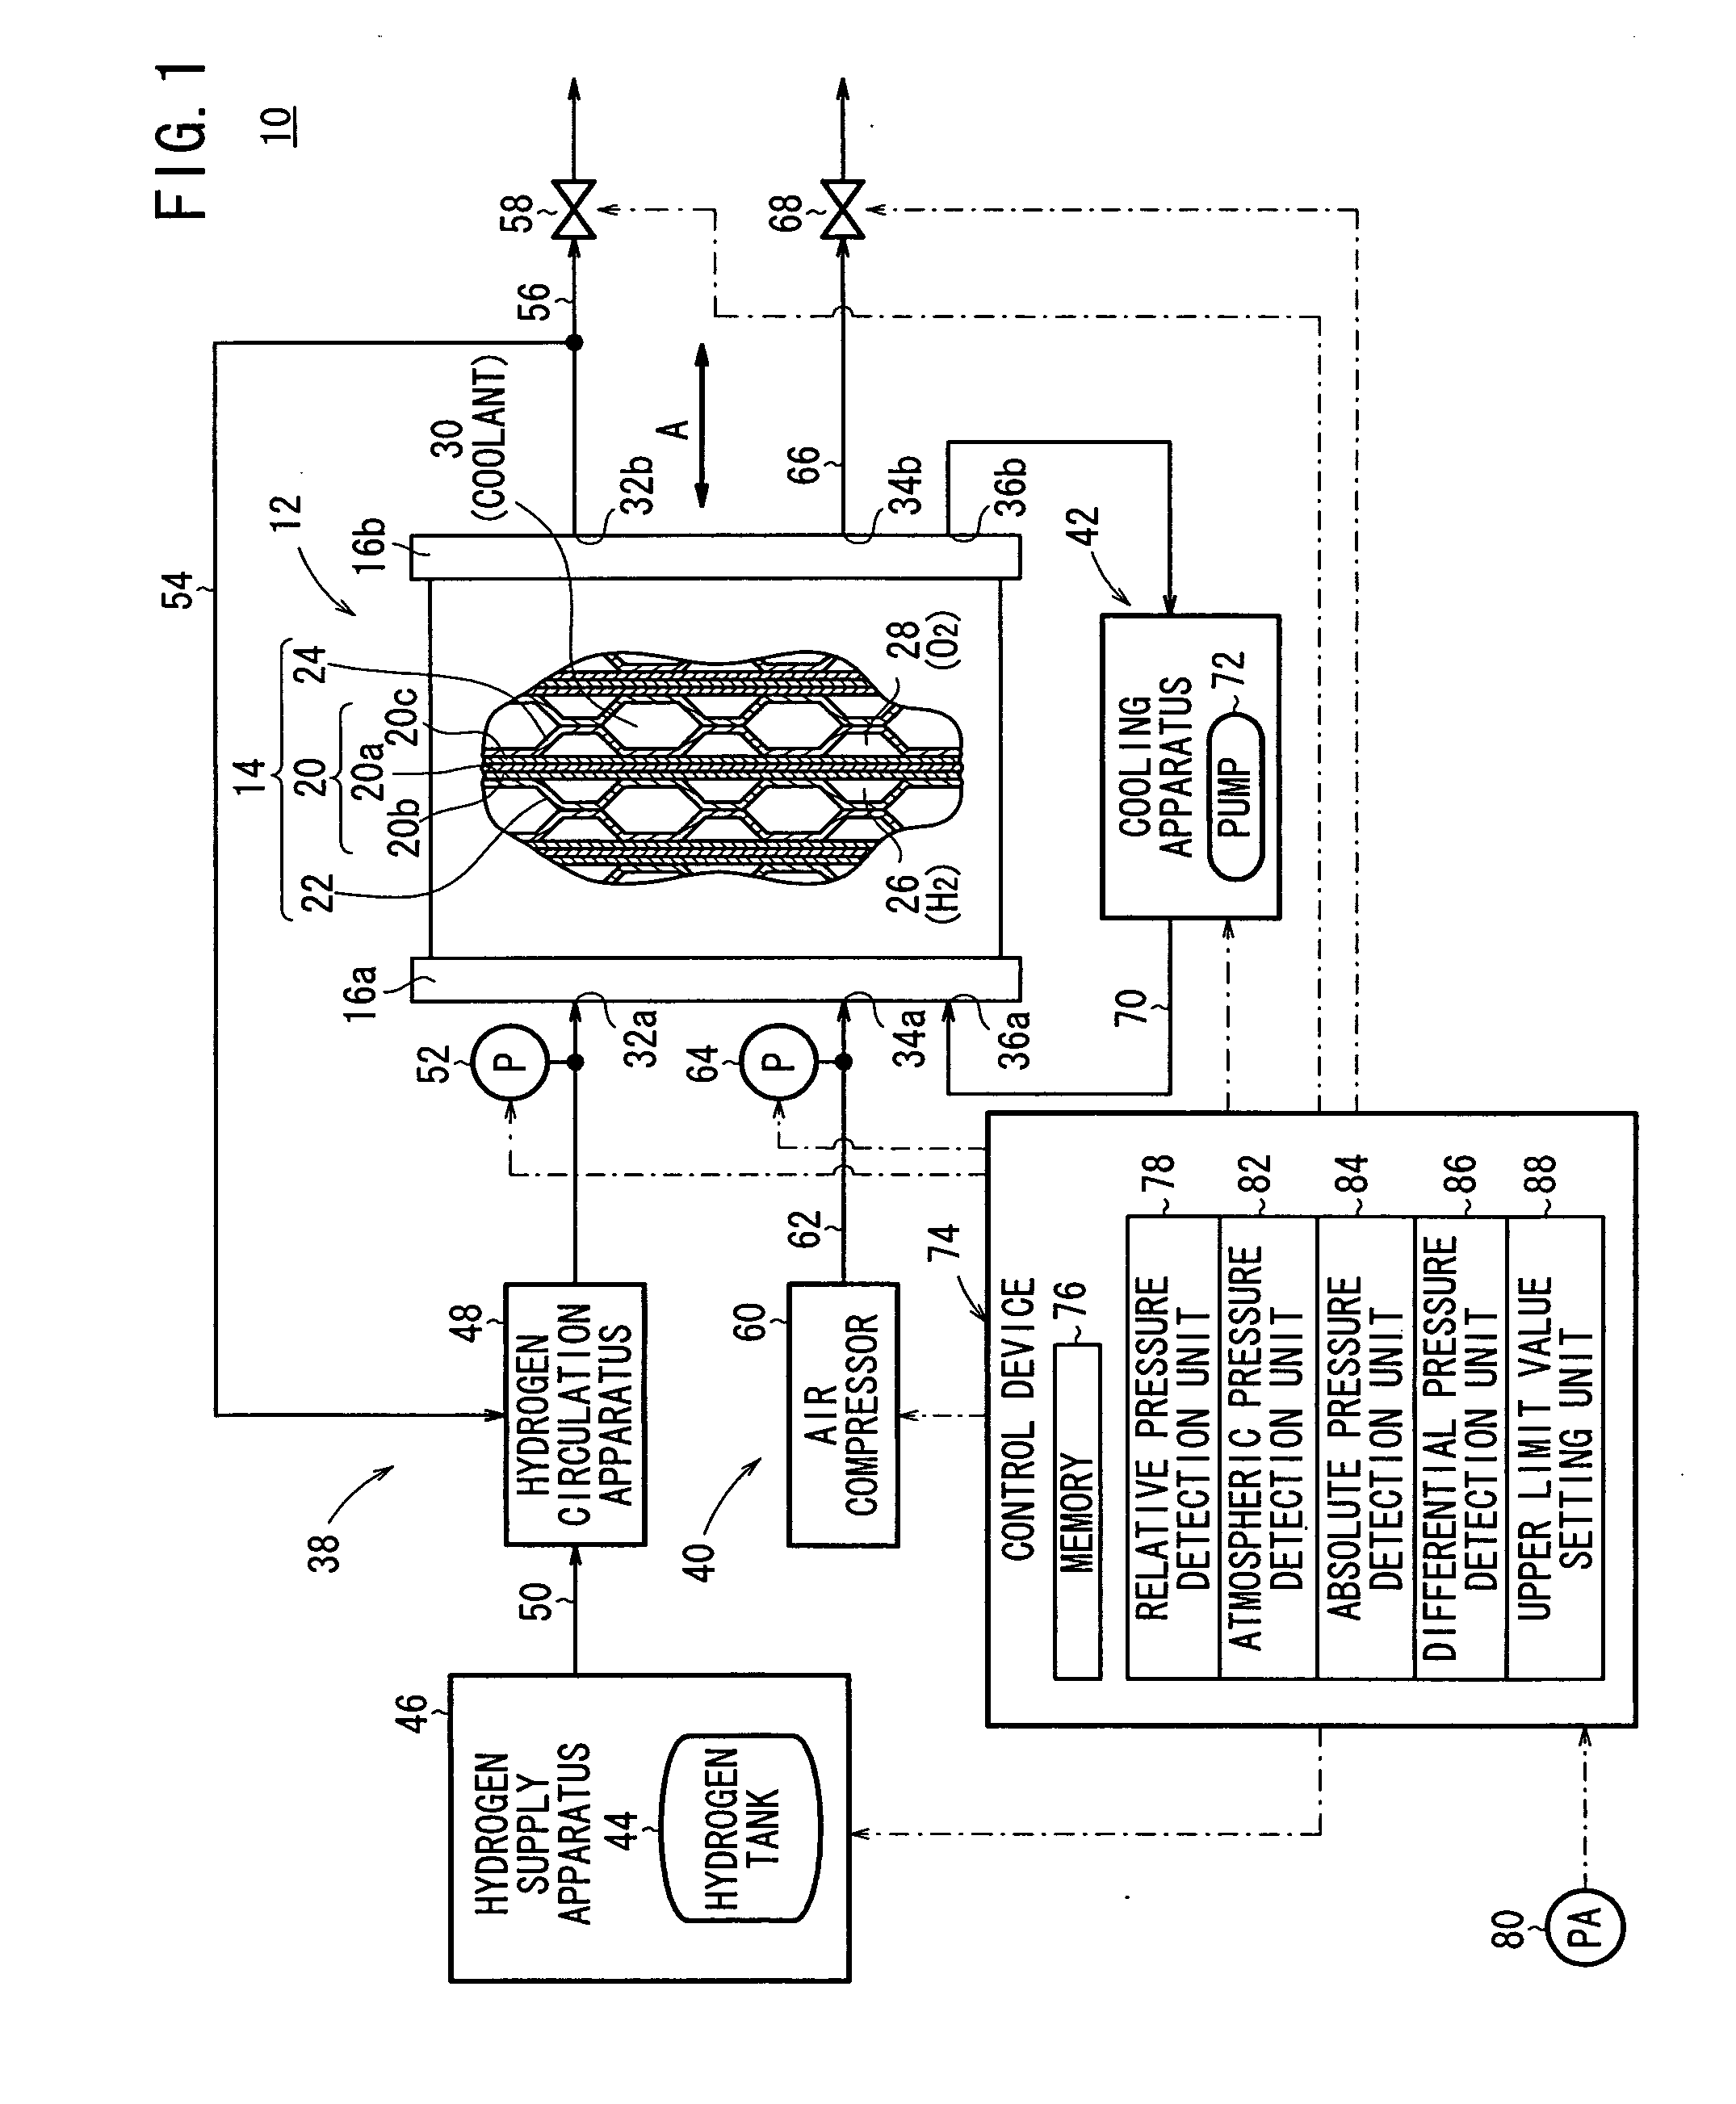 Fuel cell system and method of operating a fuel cell system